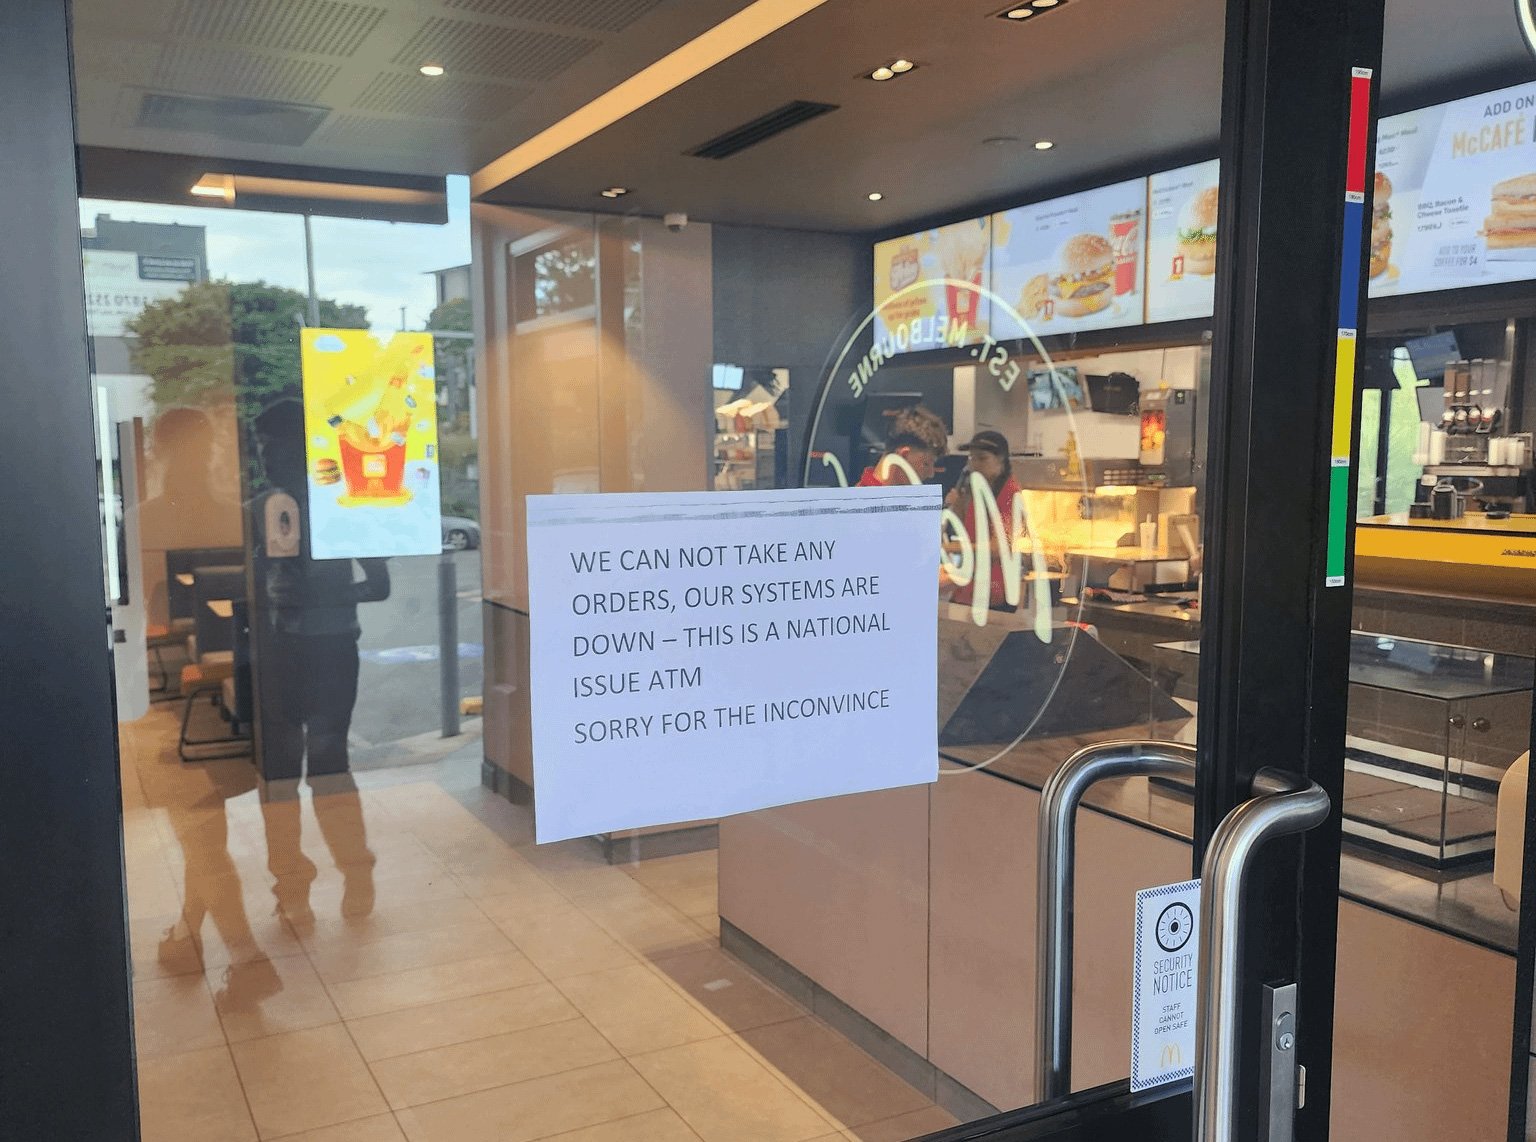 Outage notification at McDonald's restaurant